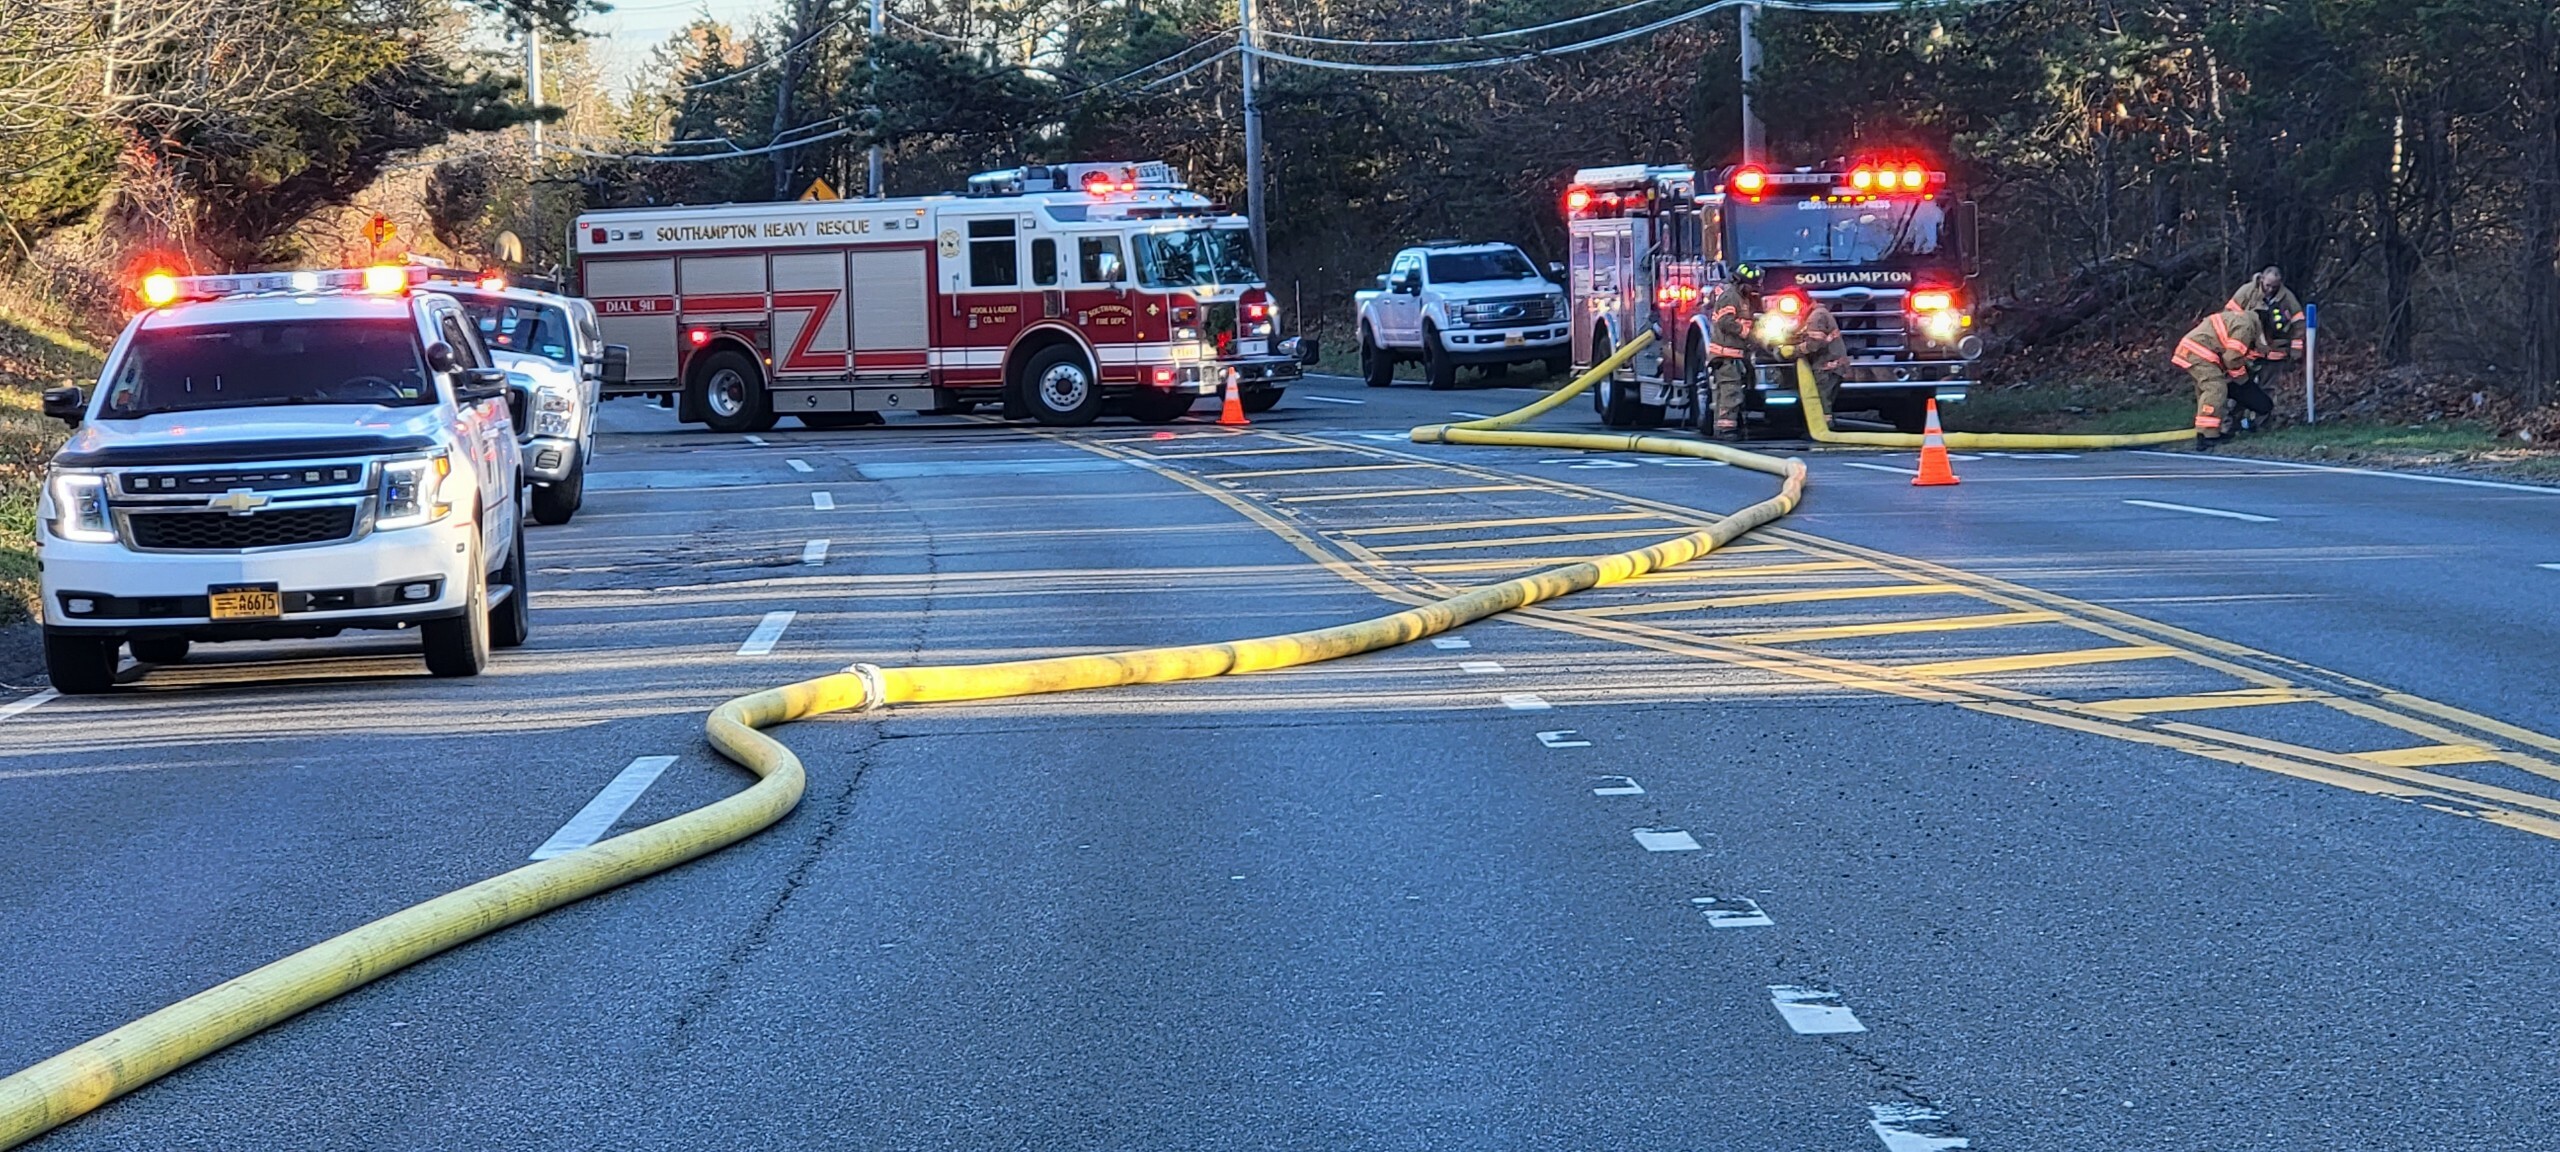 Fire hose snaked across County Road 39 in Tuckahoe, closing the main road.   COURTESY SOUTHAMPTON FIRE DEPARTMENT